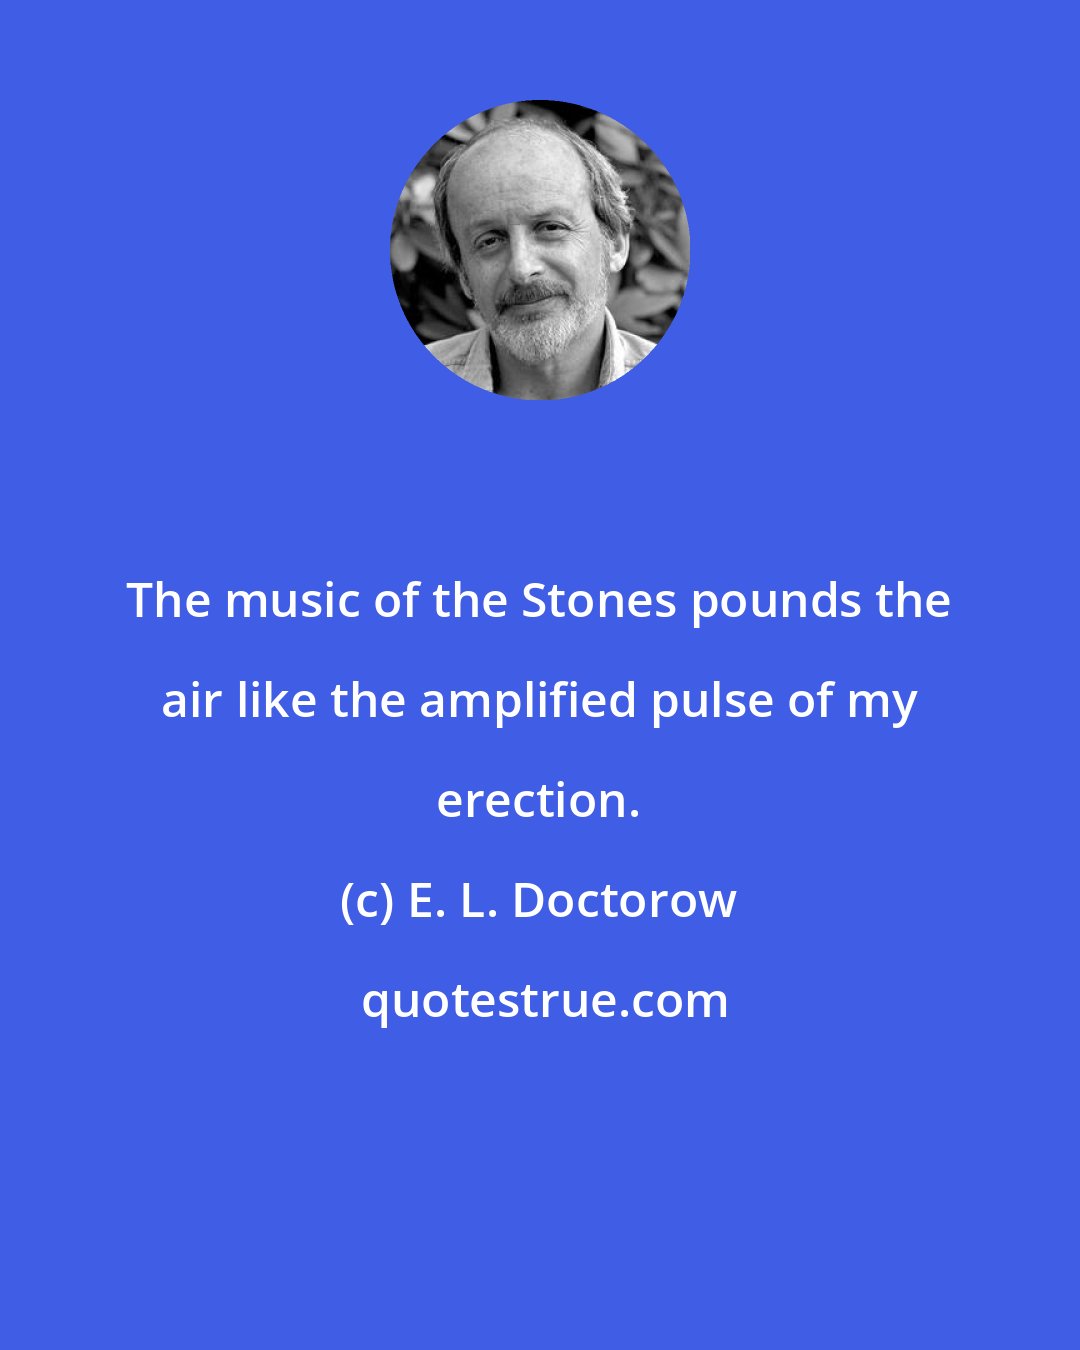 E. L. Doctorow: The music of the Stones pounds the air like the amplified pulse of my erection.